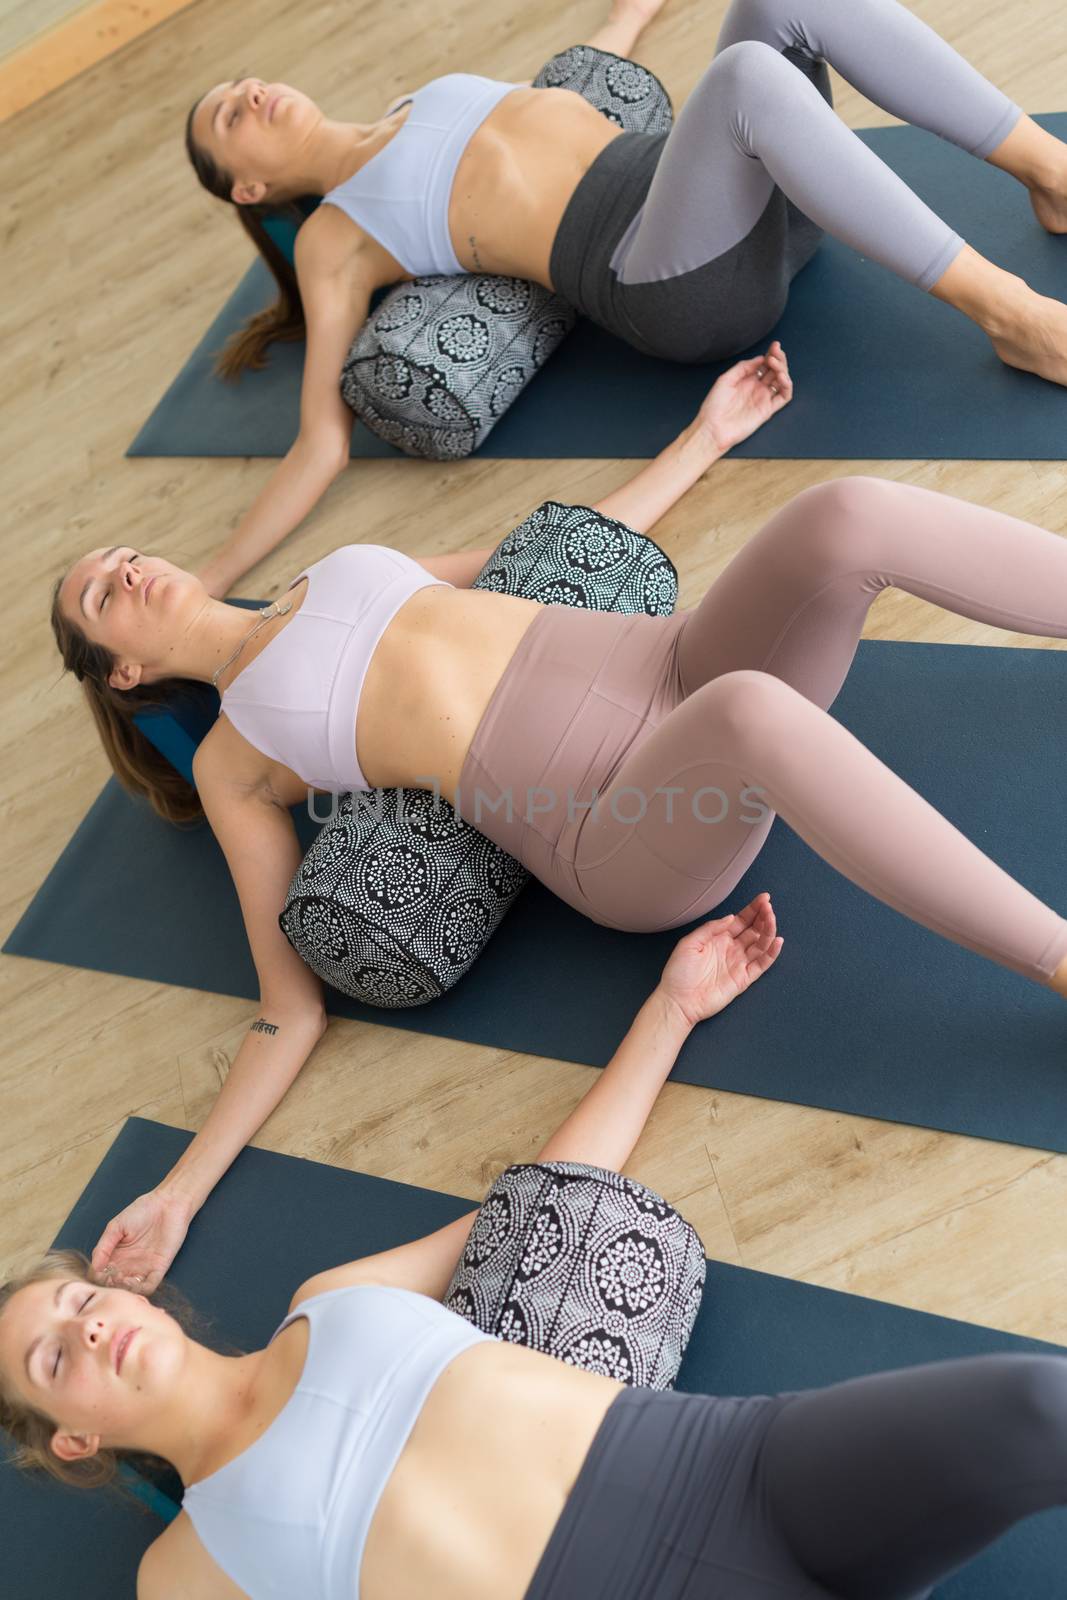 Restorative yoga with a bolster. Group of three young sporty attractive women in yoga studio, lying on bolster cushion, stretching and relaxing during restorative yoga. Healthy active lifestyle.